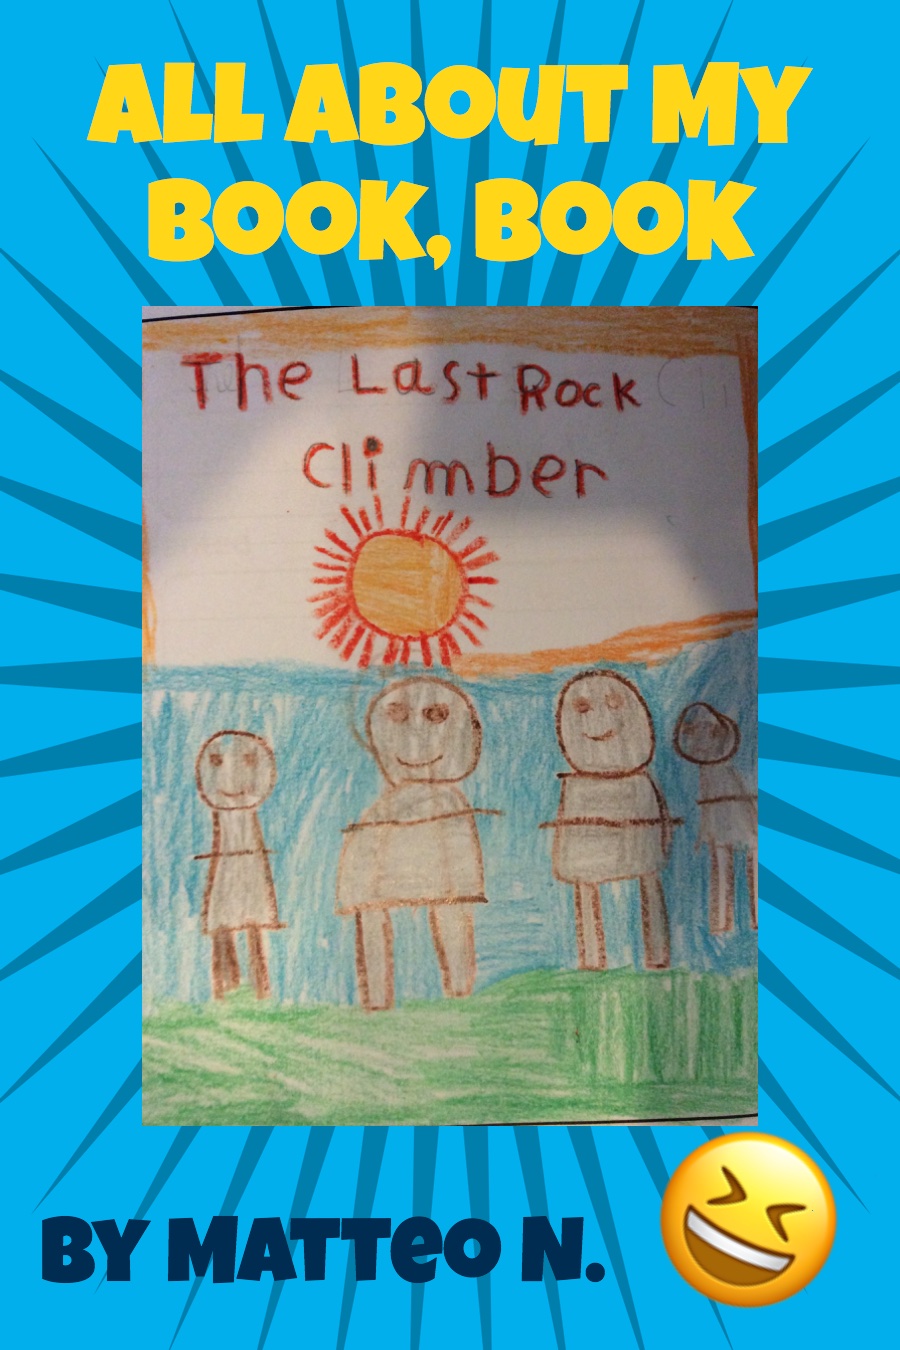 All About The Last Rock Climber by Matteo N